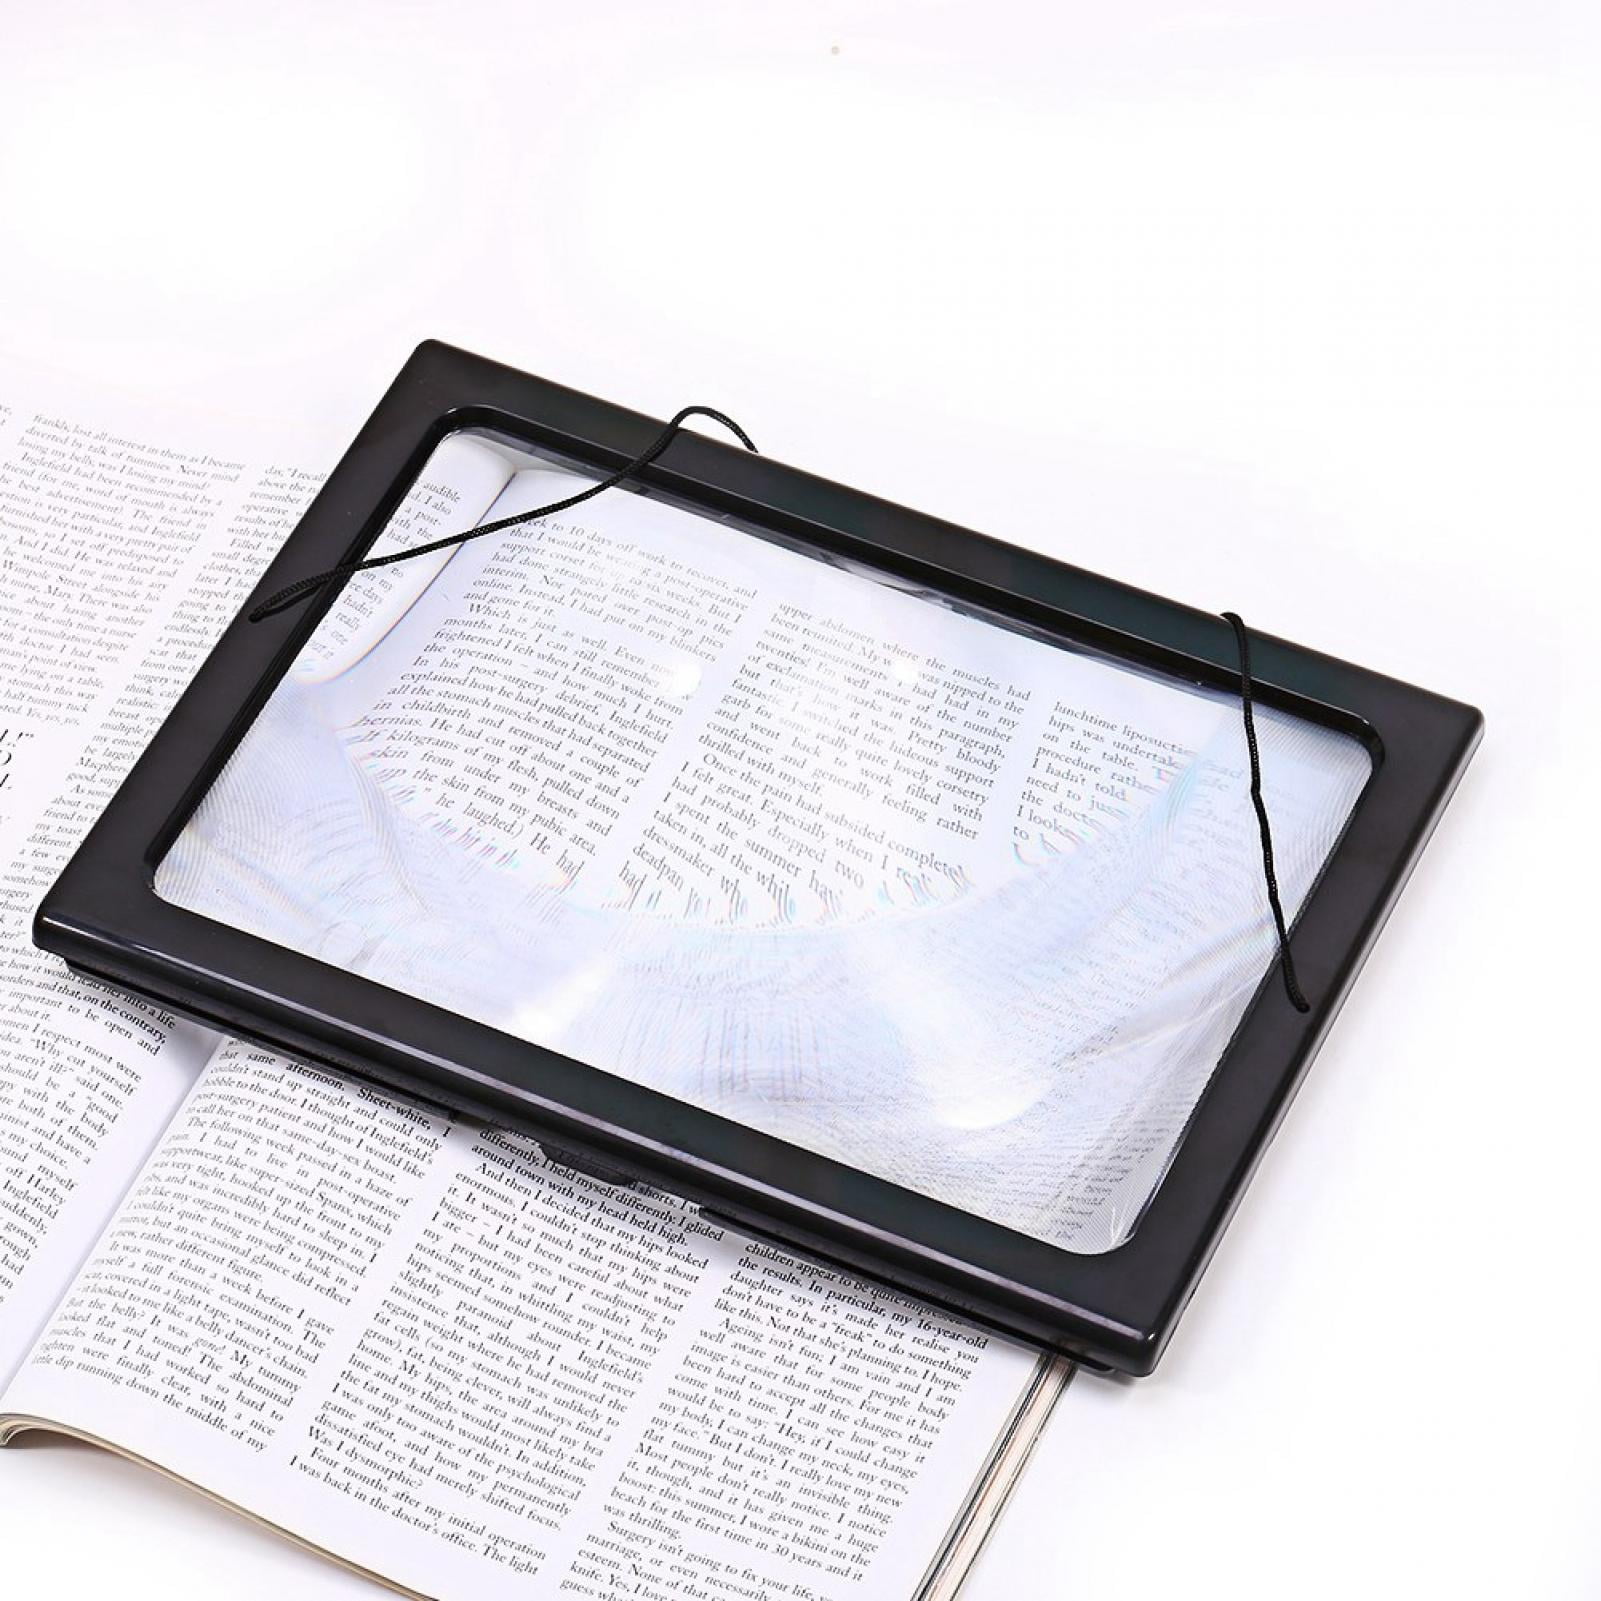 Karlge Magnifier Glass Reading Large A4 Page Hands Free 3x Magnifying Glass W Light Led